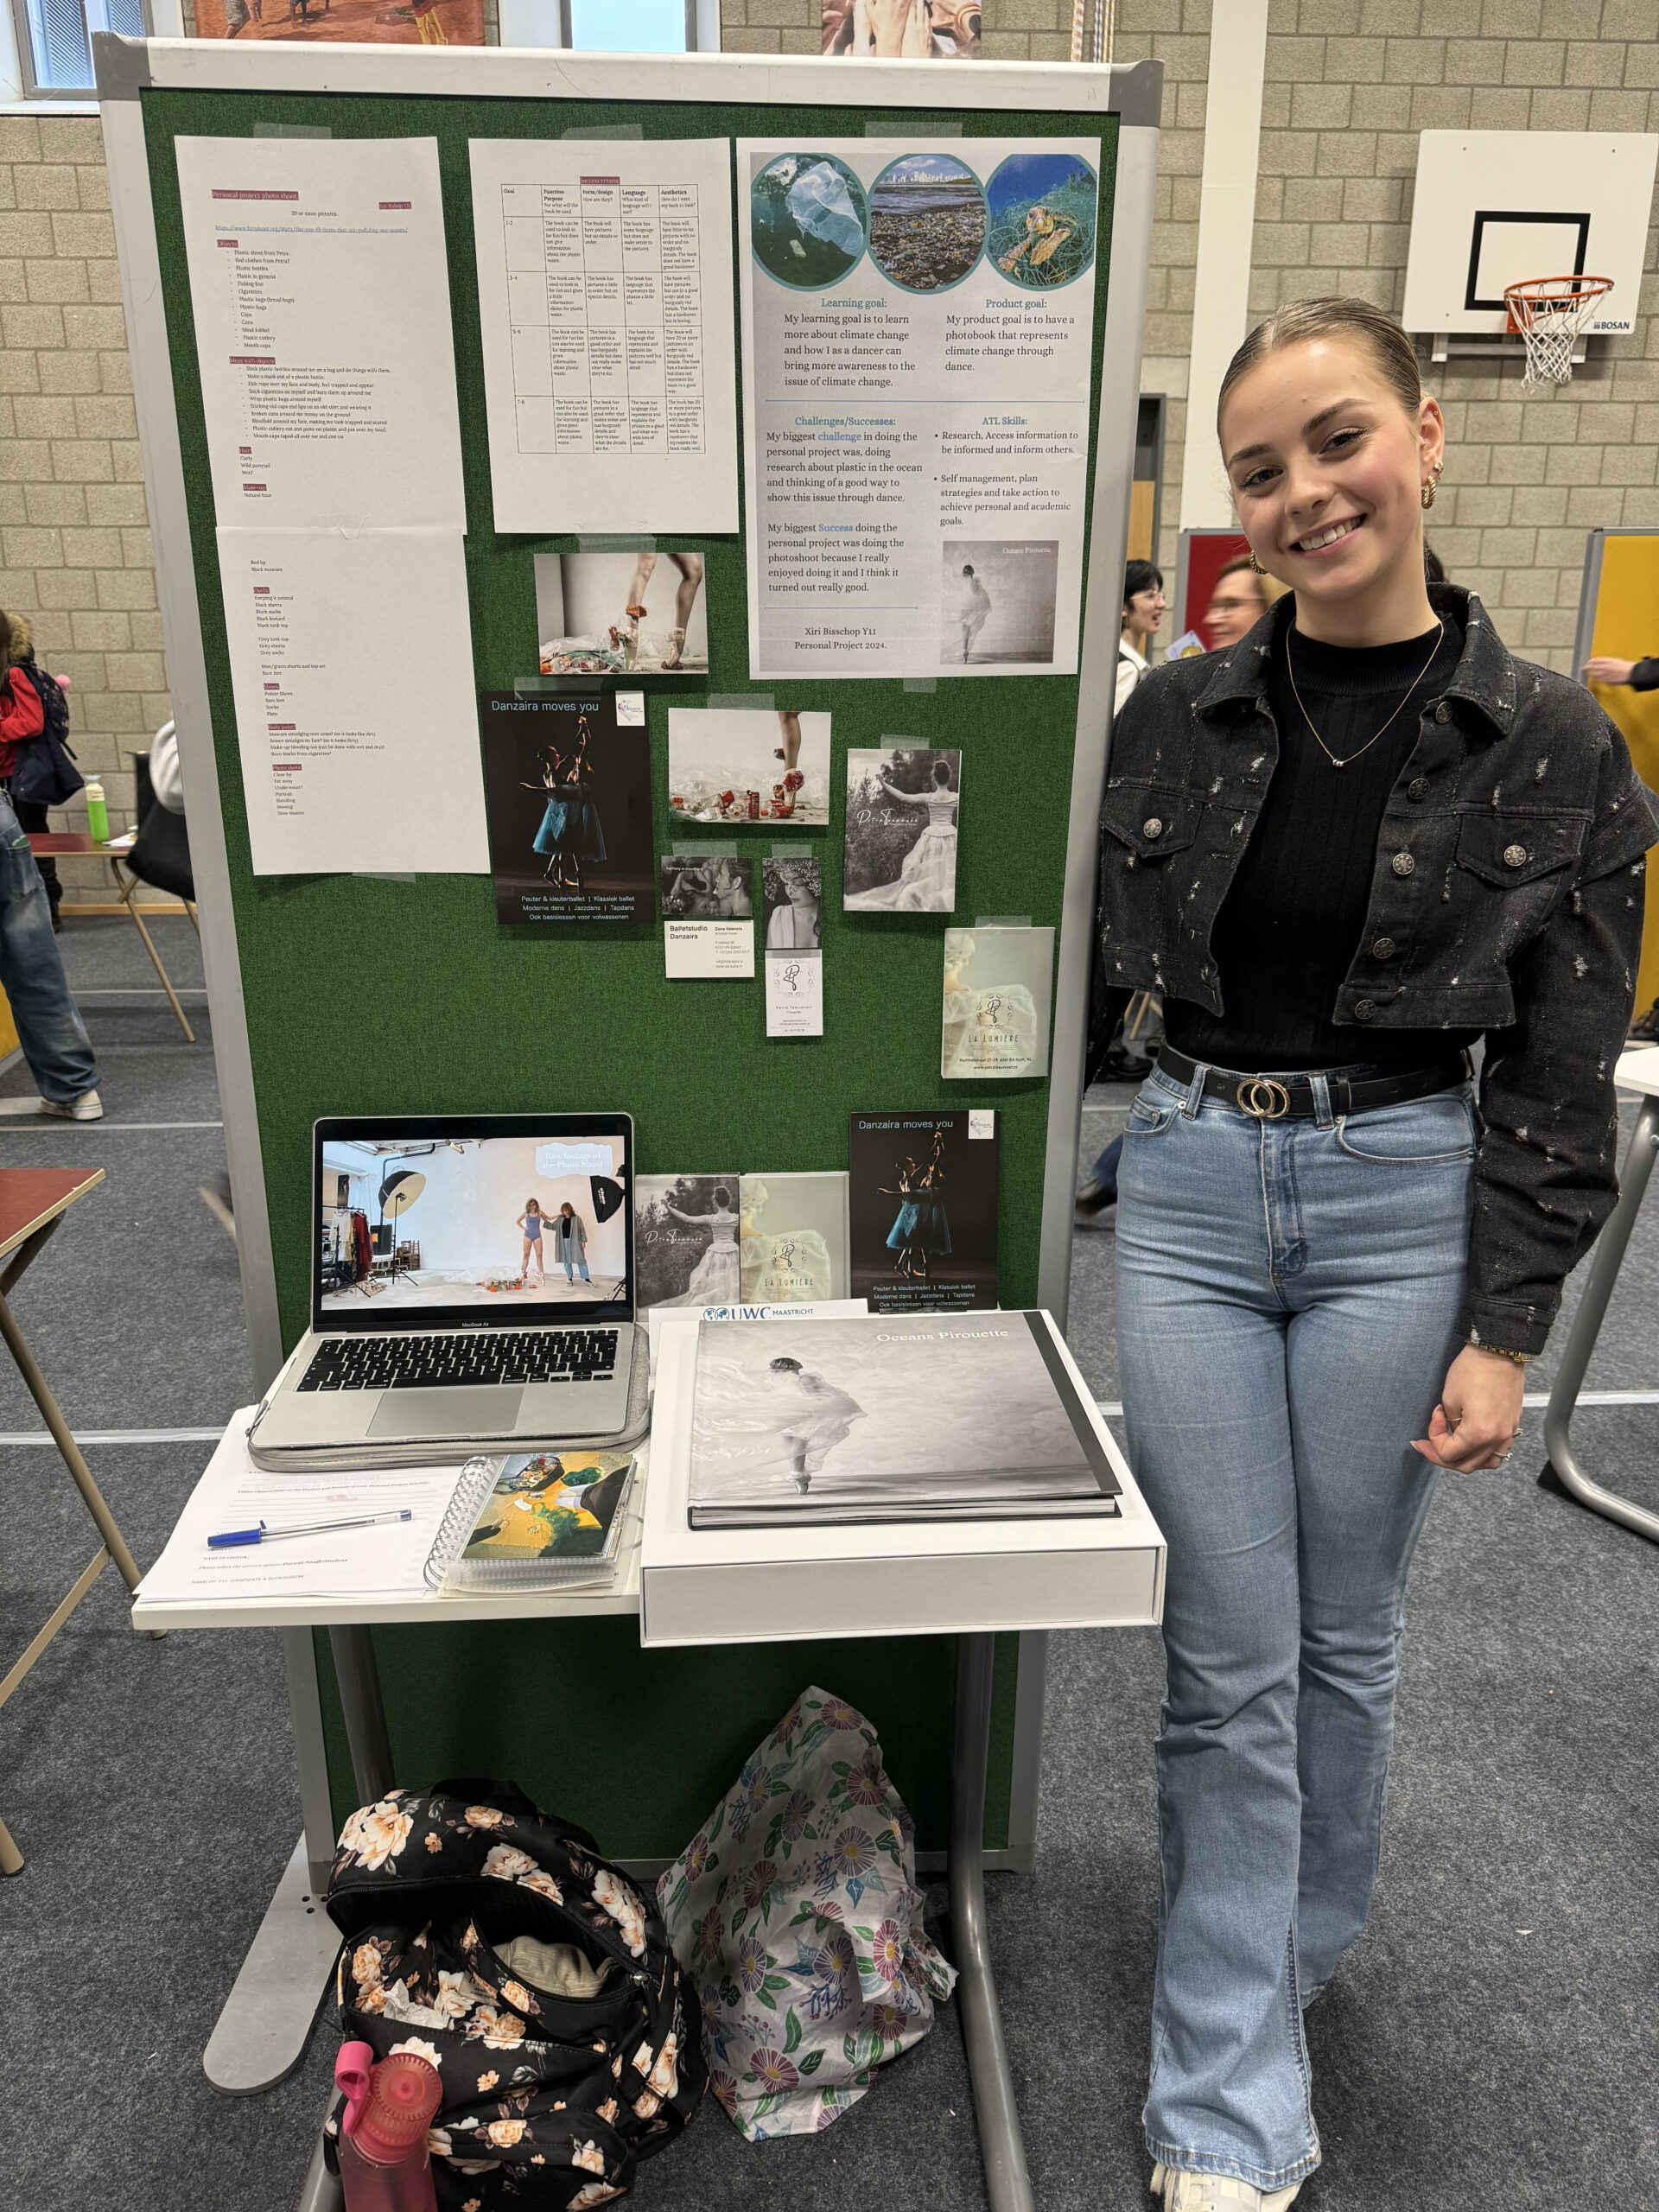 Student showing her project